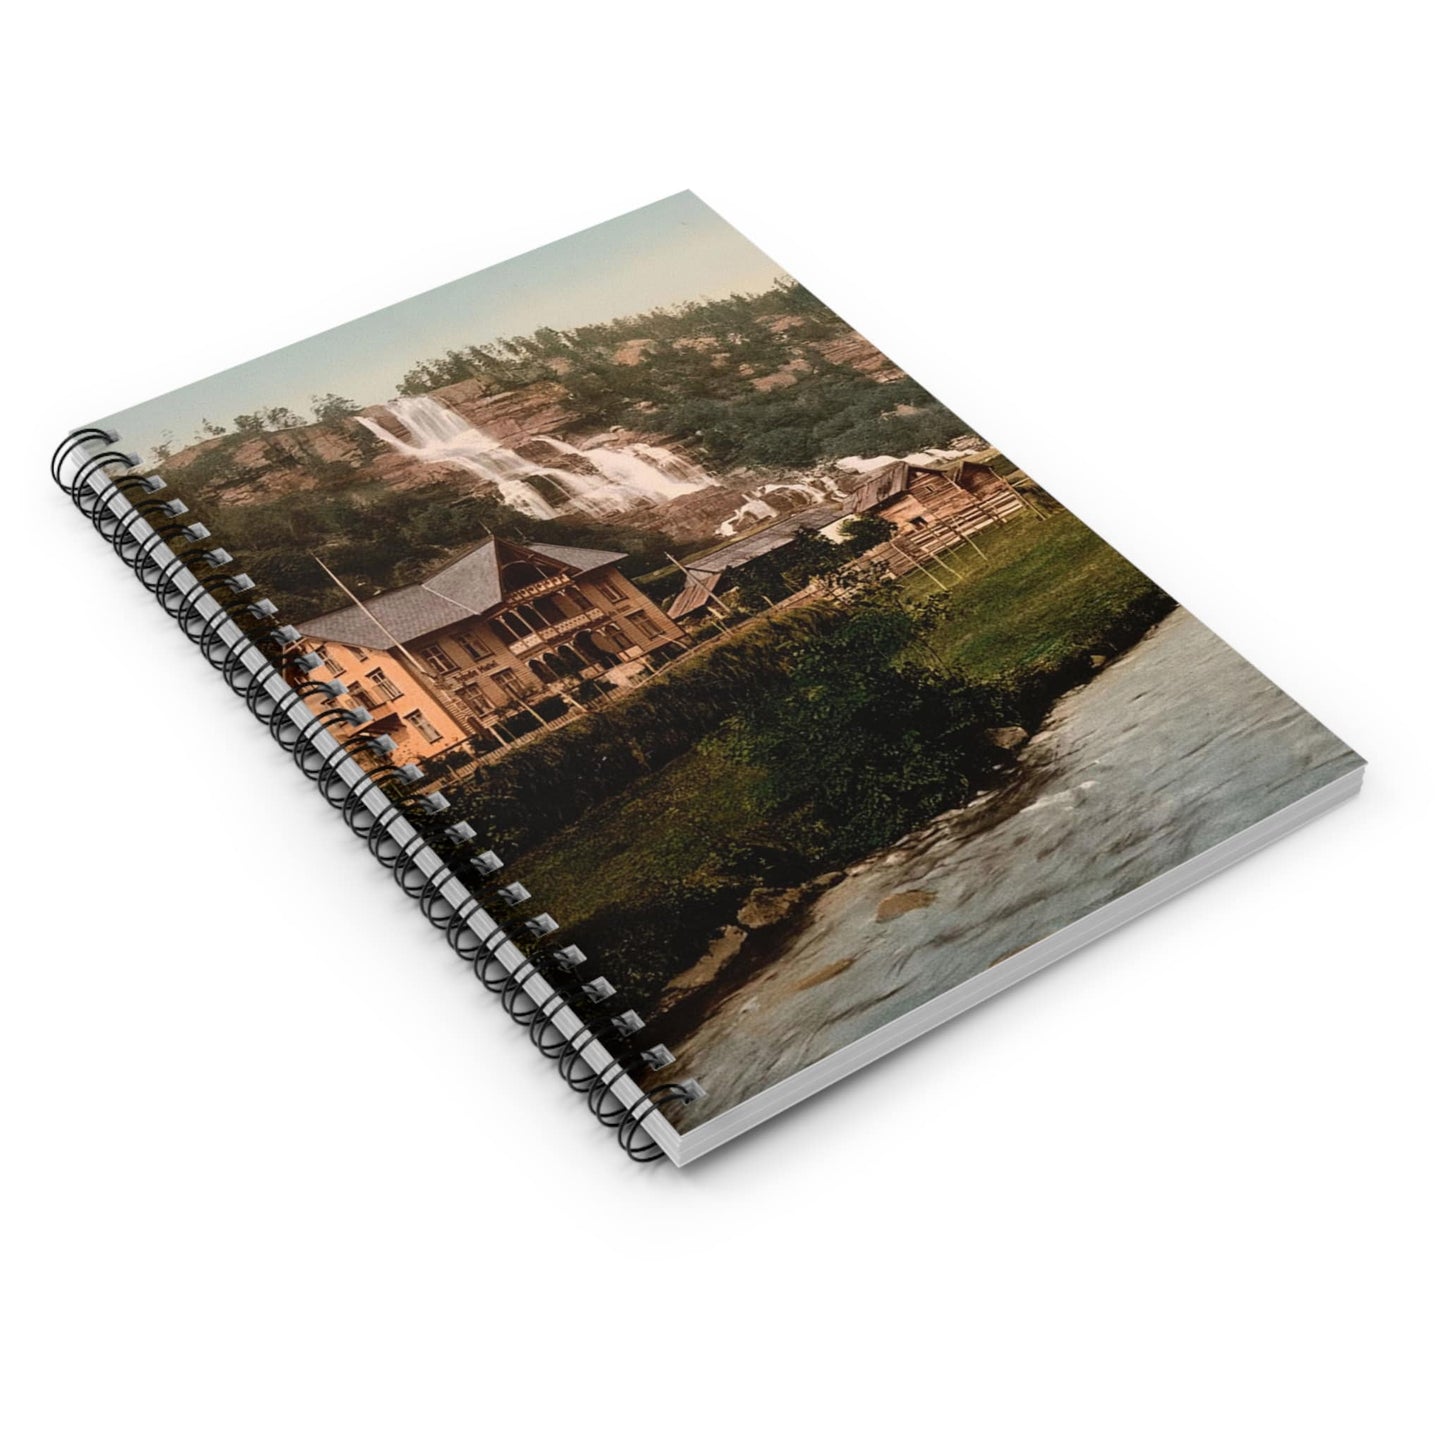 Vintage Mountain River Spiral Notebook Laying Flat on White Surface